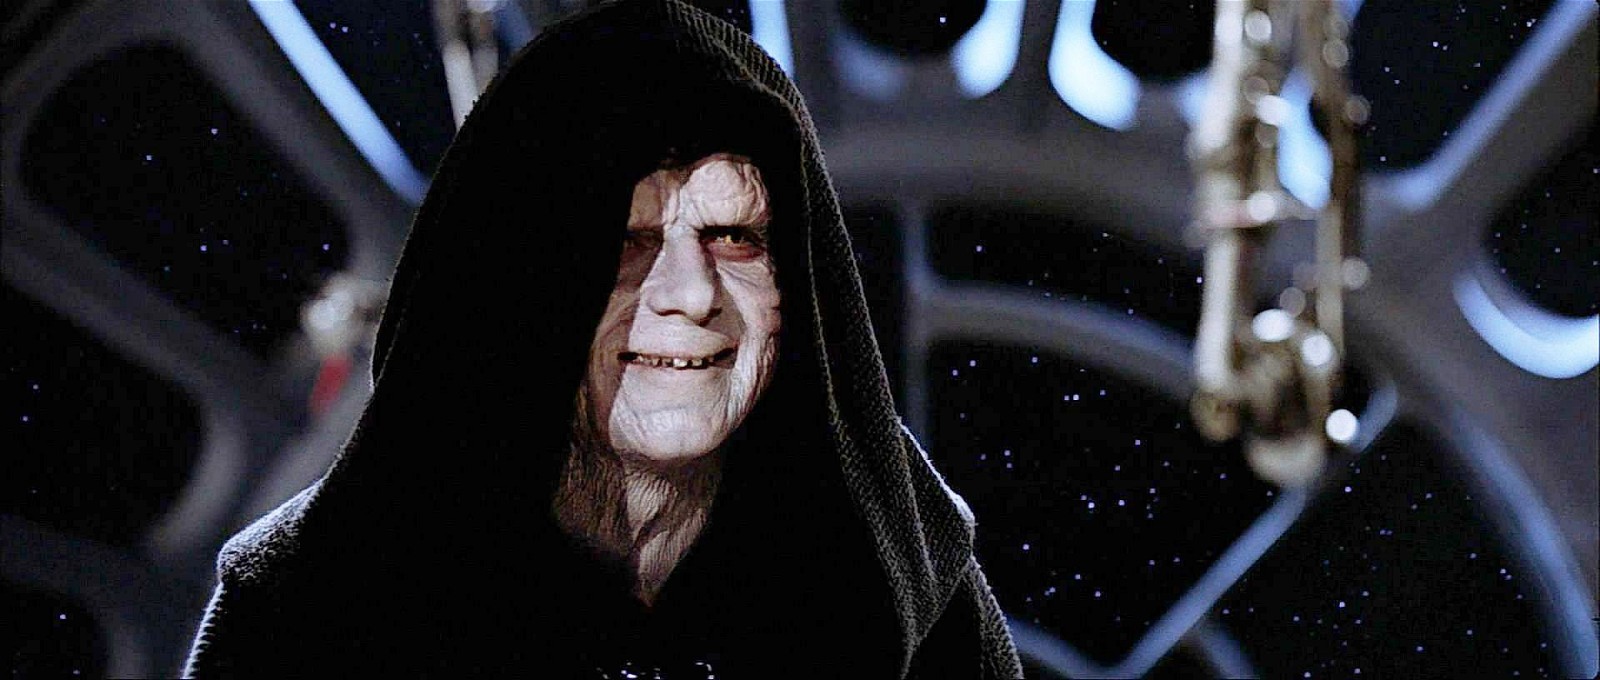 Clive Revill as Emperor Palpatine in The Empire Strikes Back 